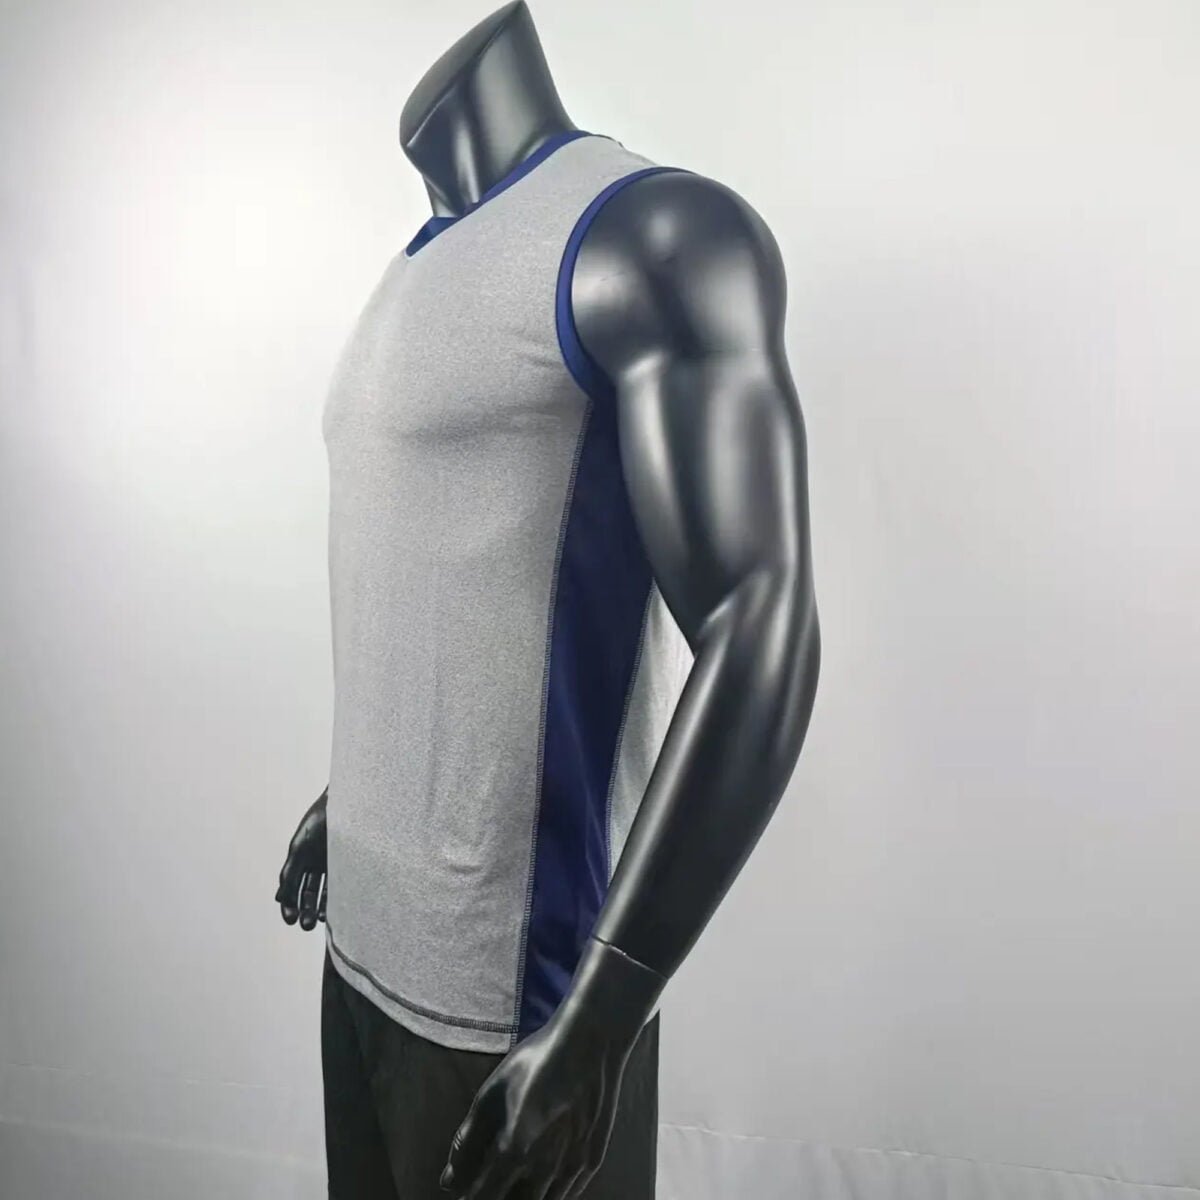 Fashionable tight fit vests